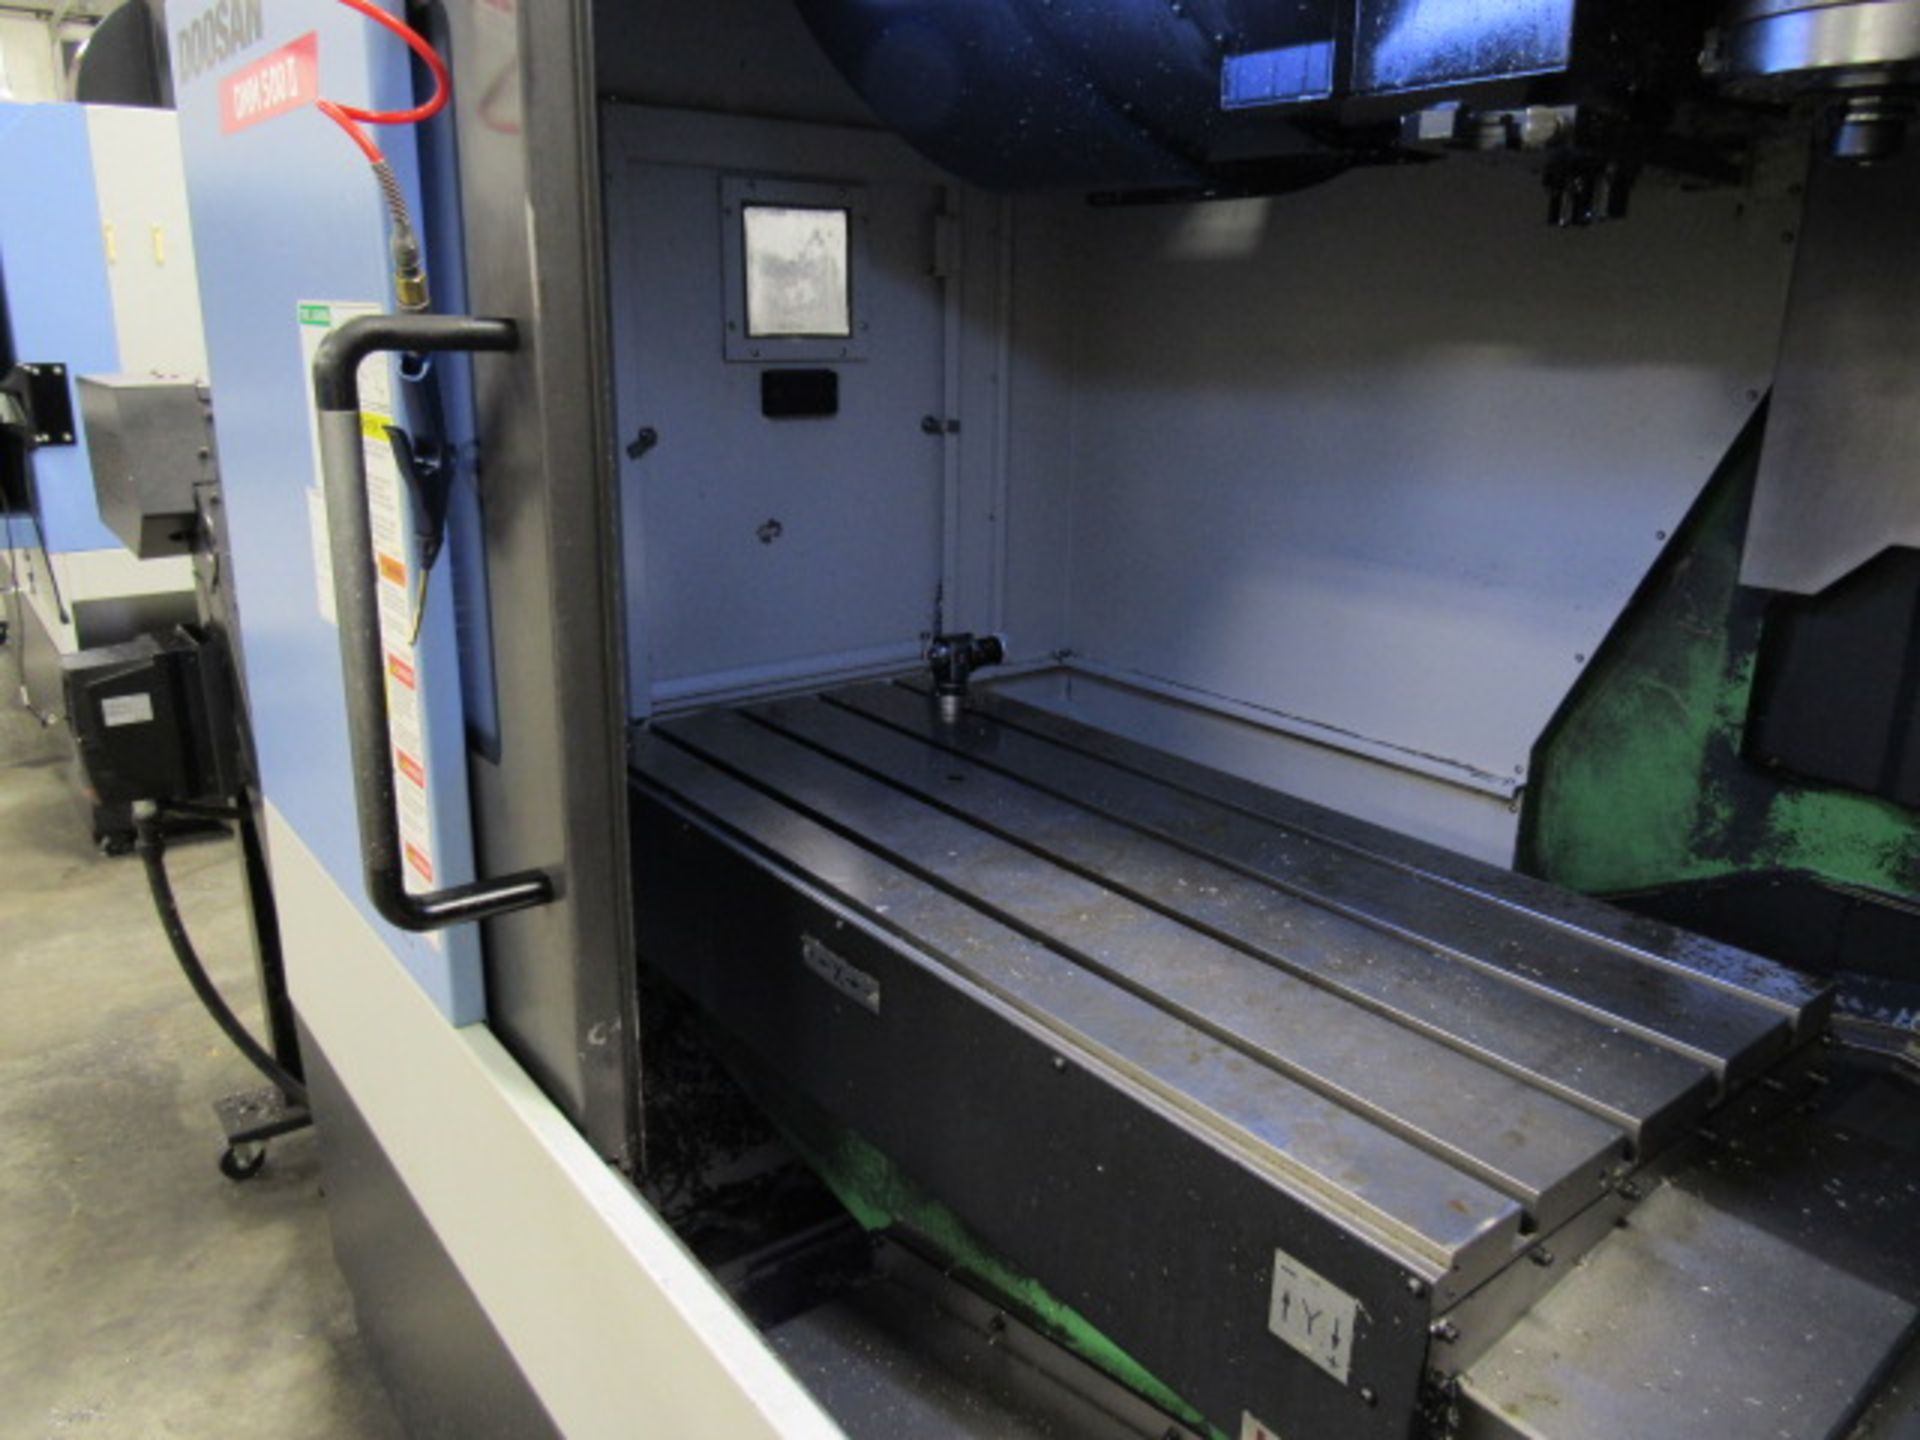 Doosan DNM 500 II CNC Vertical Machining Centers with 47.2'' x 21.2'' Tables, Big Plus #40, - Image 3 of 9